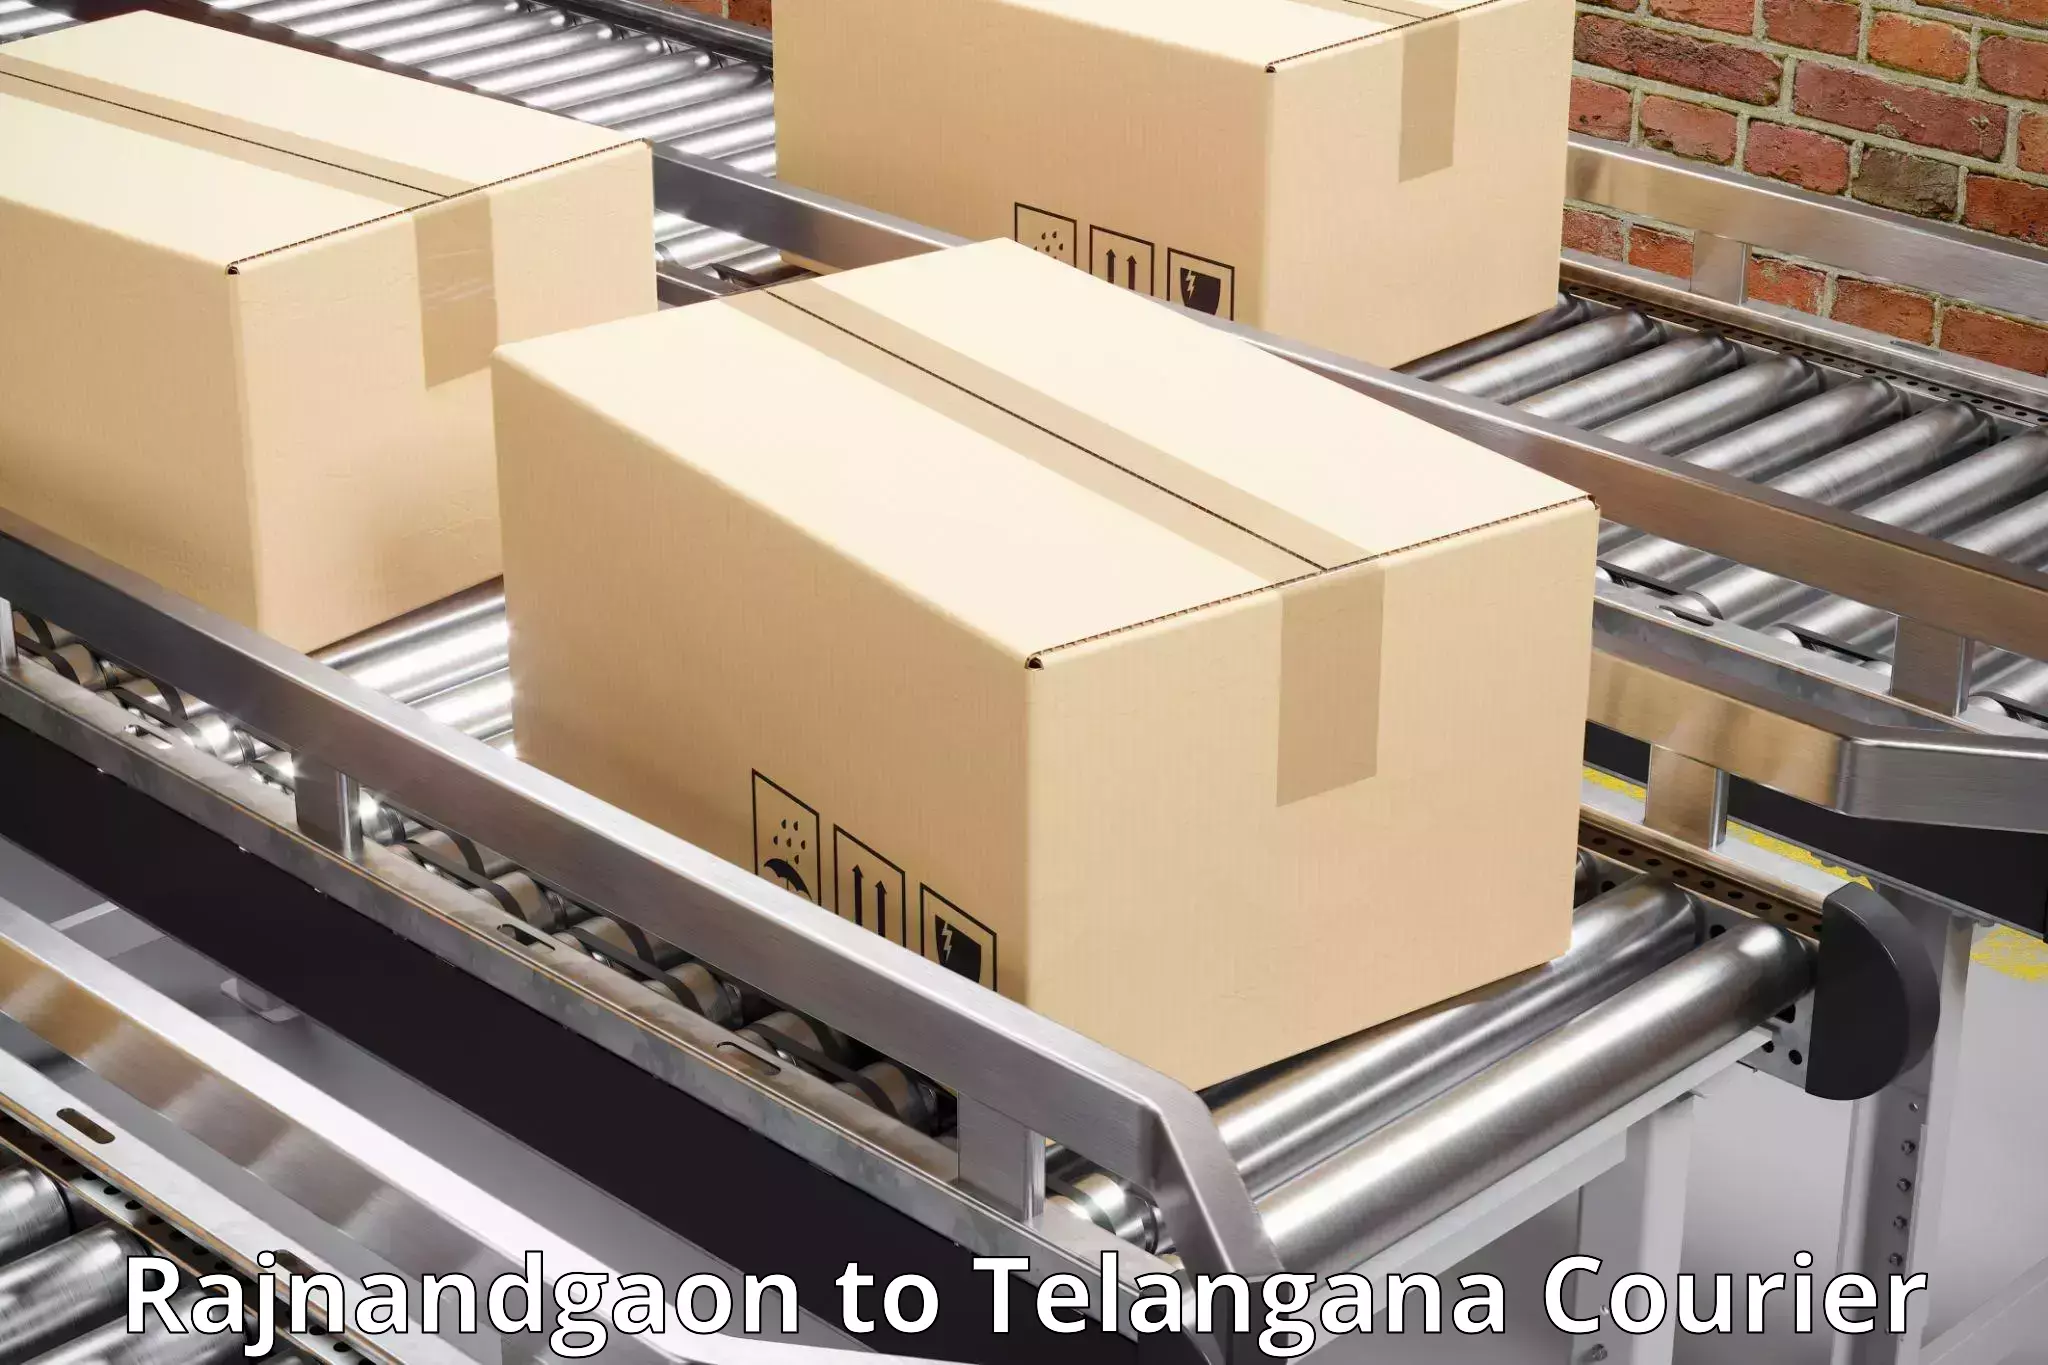 Courier service partnerships in Rajnandgaon to Khammam